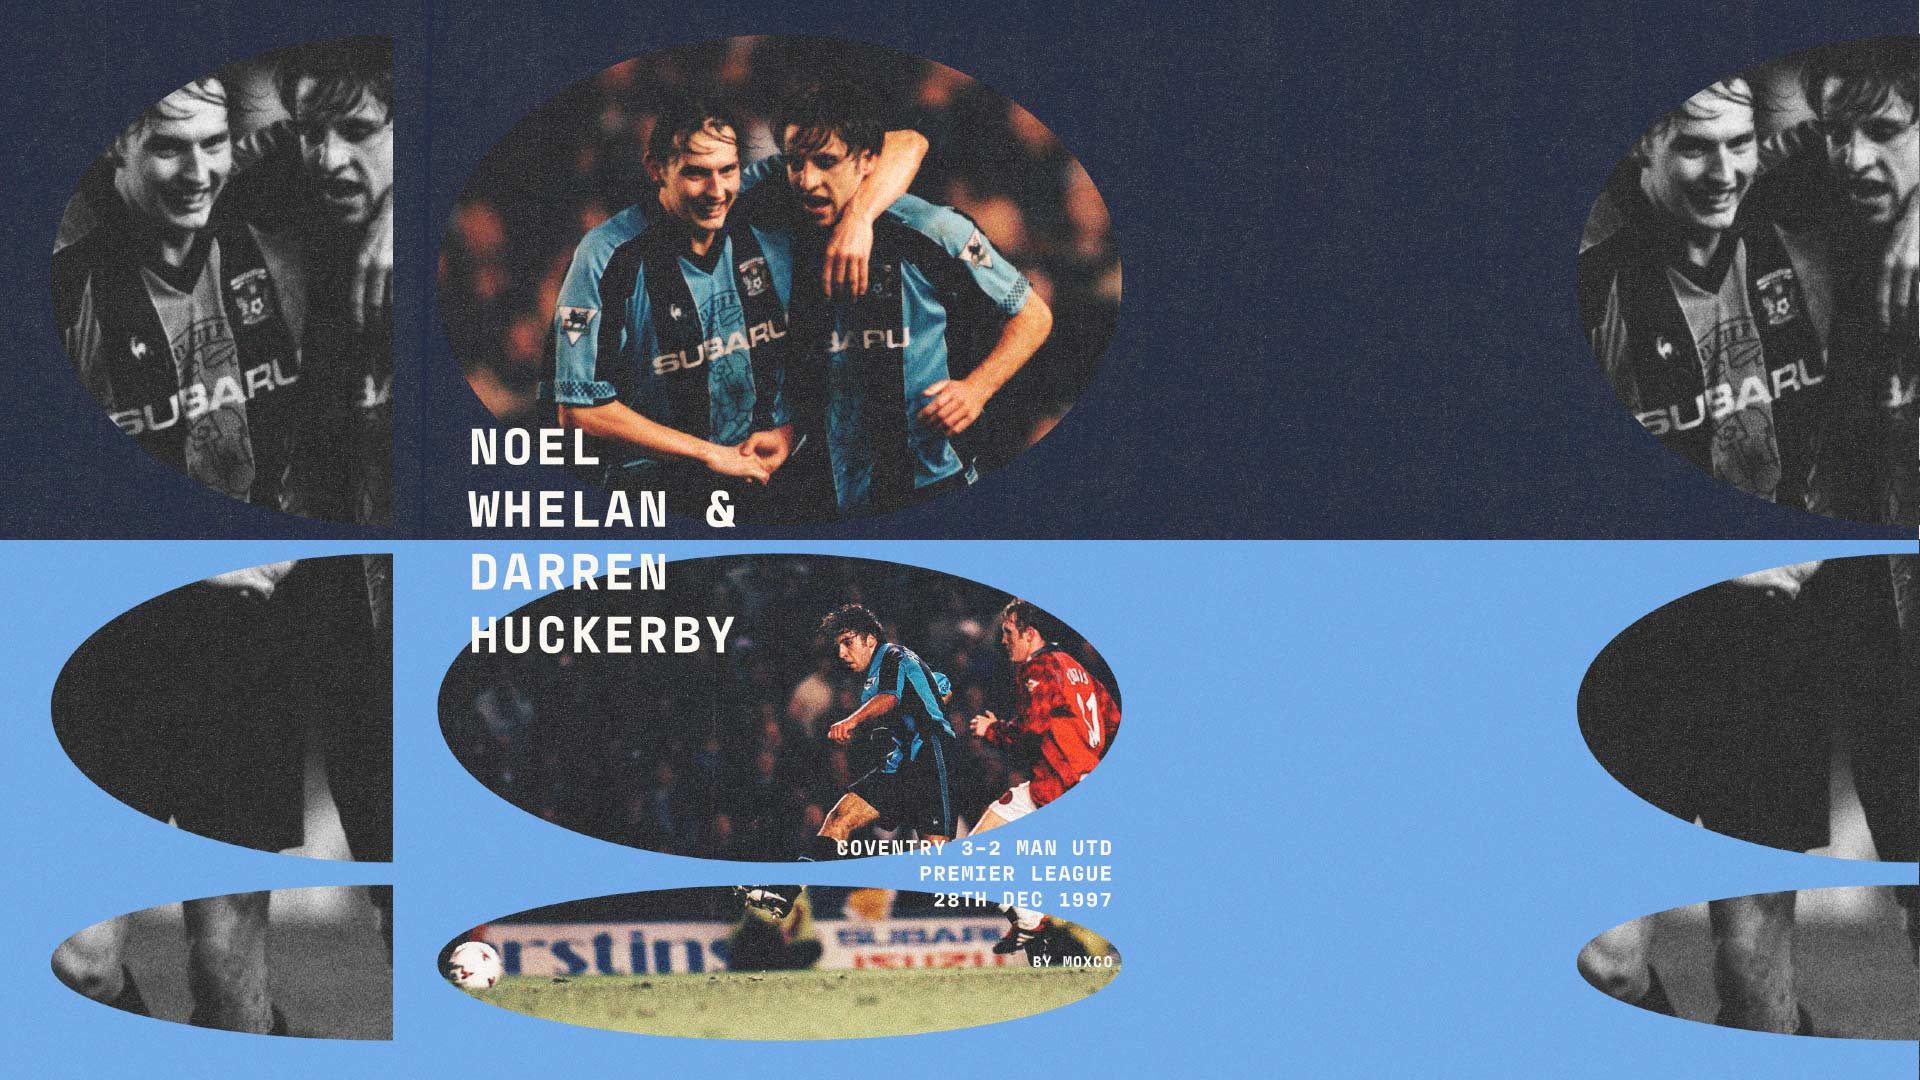 Noel Whelan and Darren Huckerby celebrating scoring against Scum for Coventry. Noel is telling Huckerby he should join Leeds one day, probably